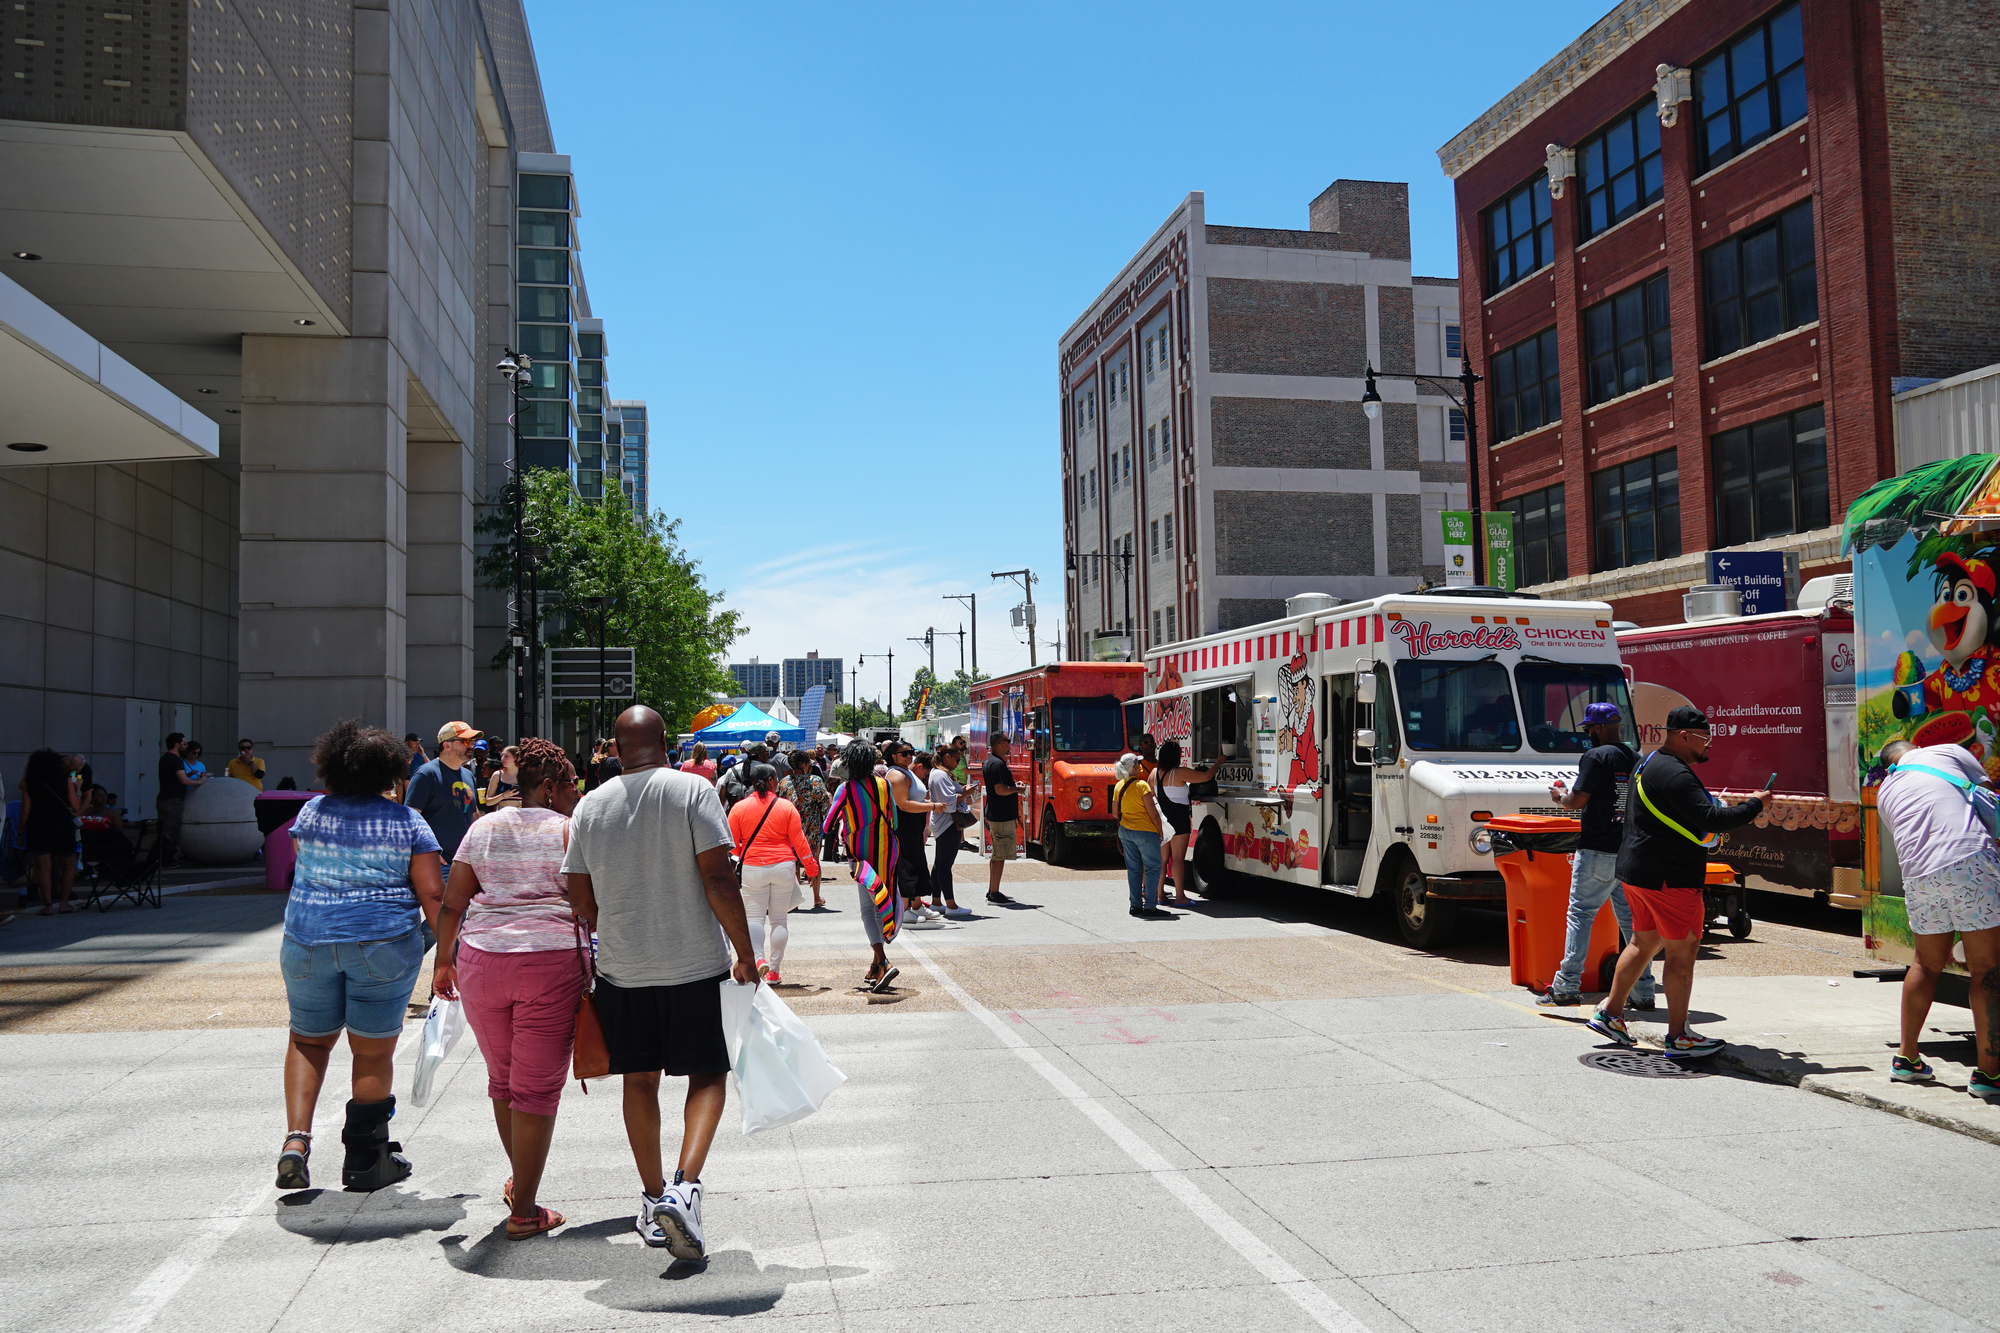 The Chicago Food Truck Festival